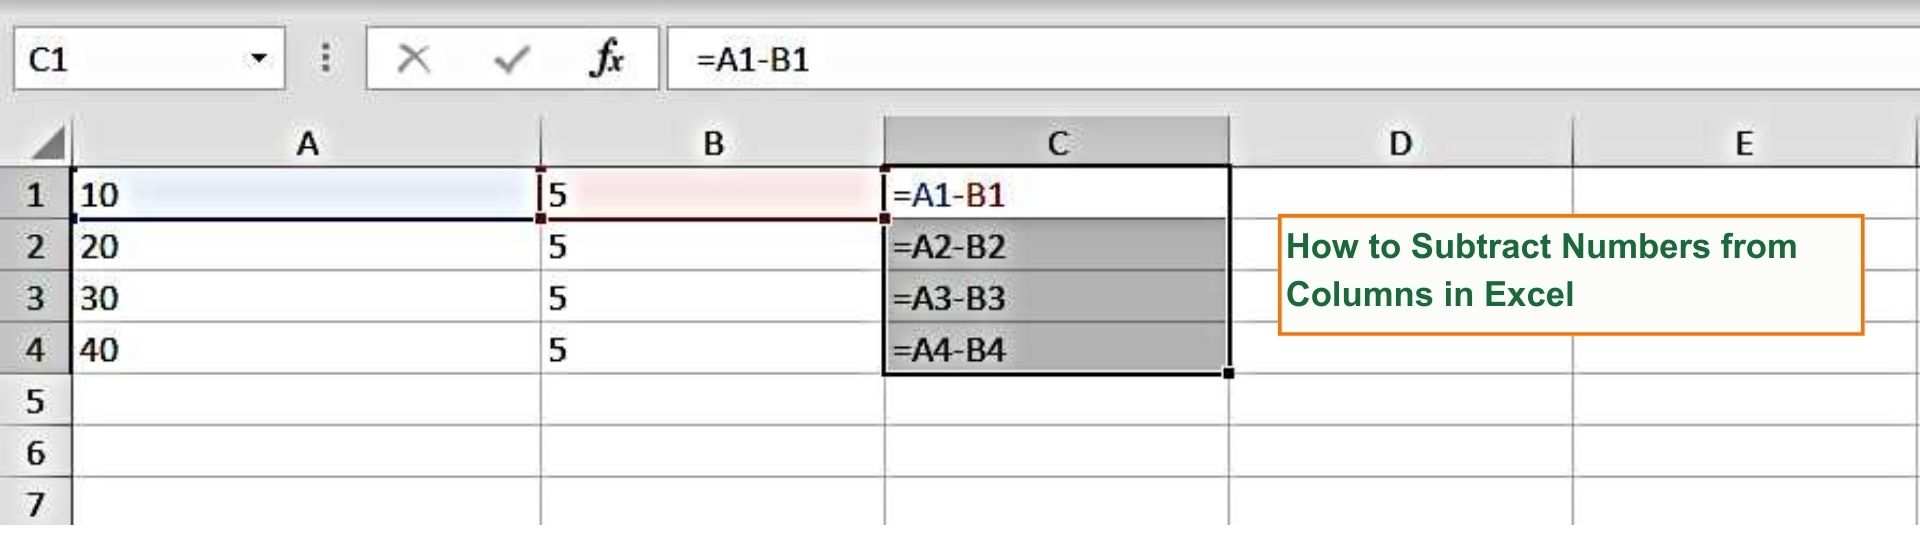 How to Subtract Numbers from Columns in Excel - Excel Hippo